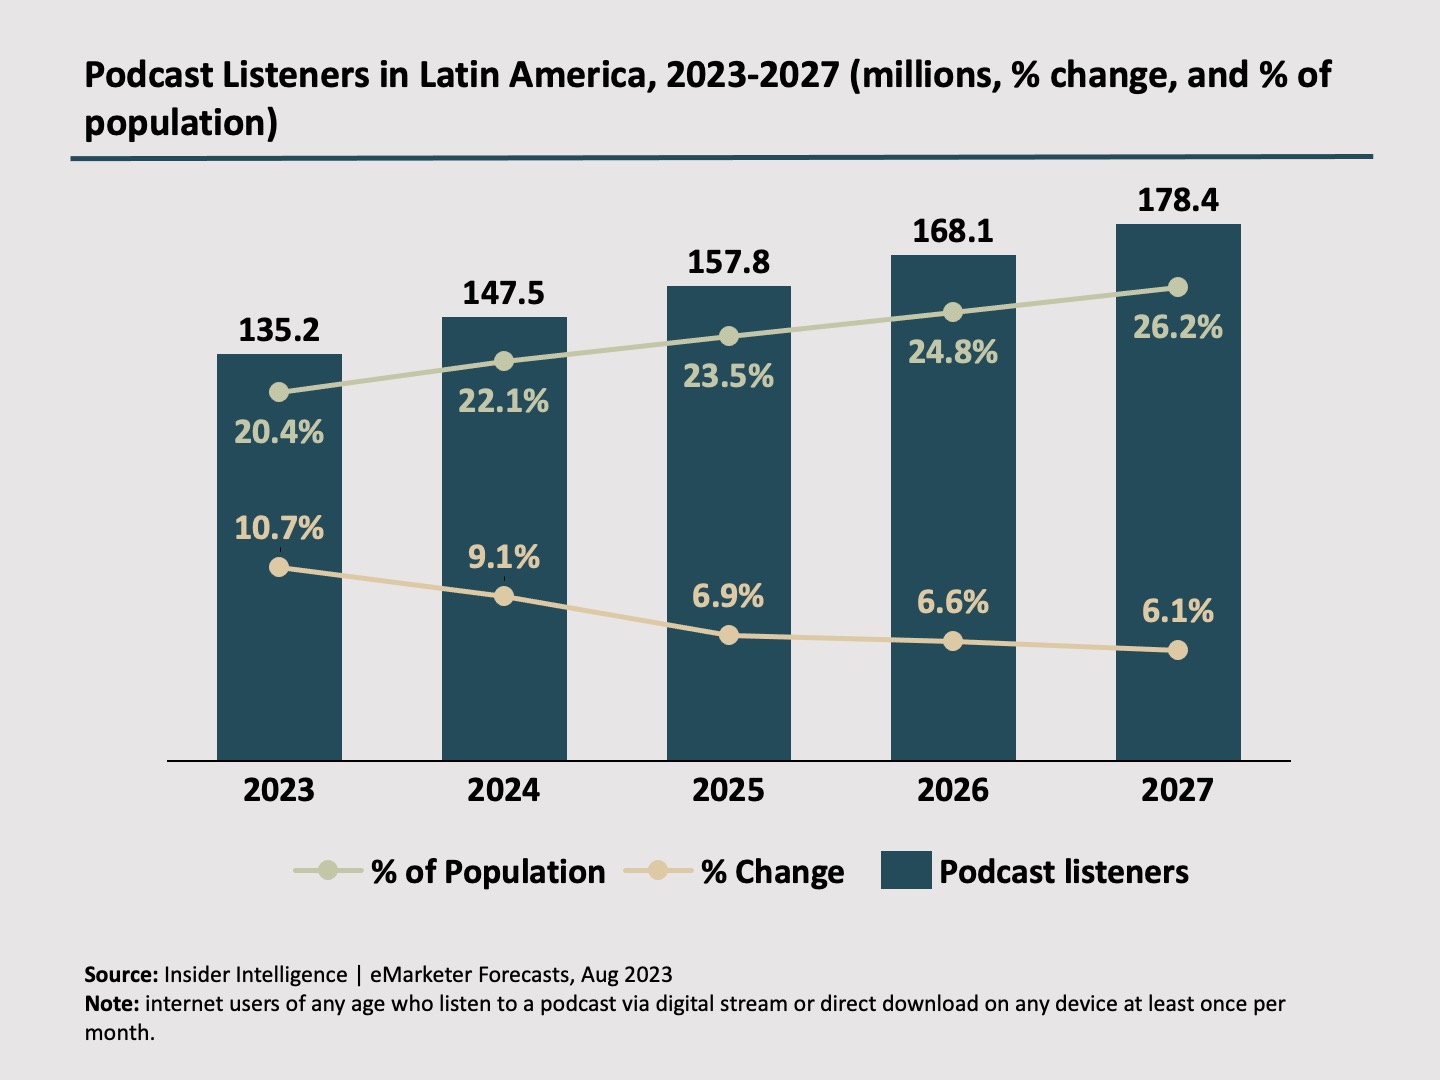 Listeners in select countries in Latin America